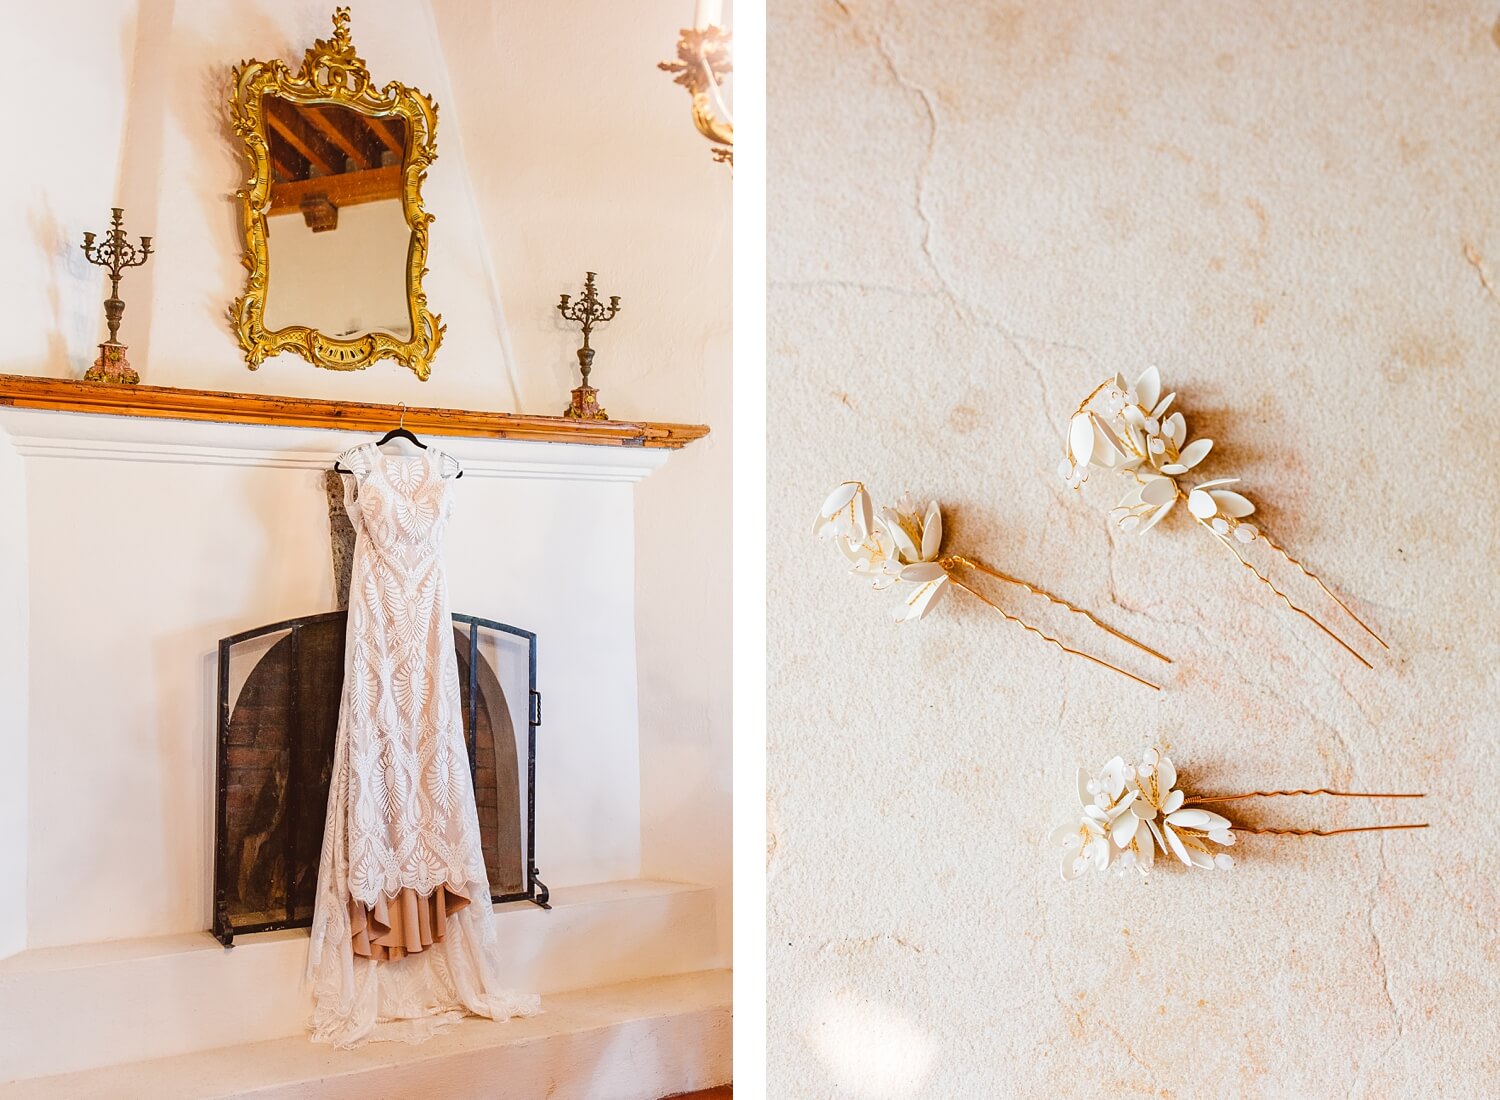 Laser cut lace wedding dress handing on wooden mantle | floral hair pins | Brooke Michelle Photo